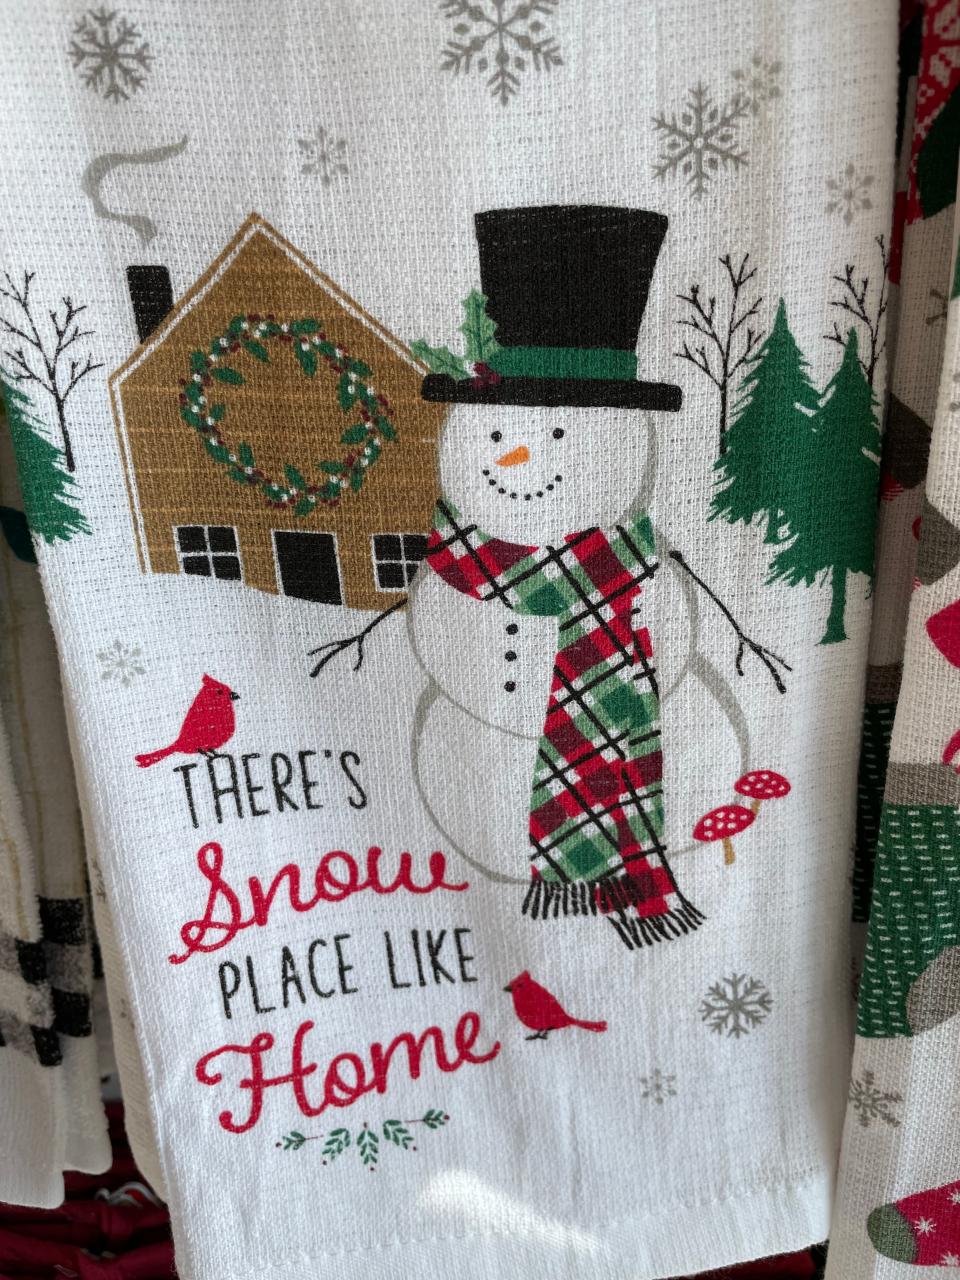 Christmas towels are popular items at the Driesengas' new craft location in Powell.